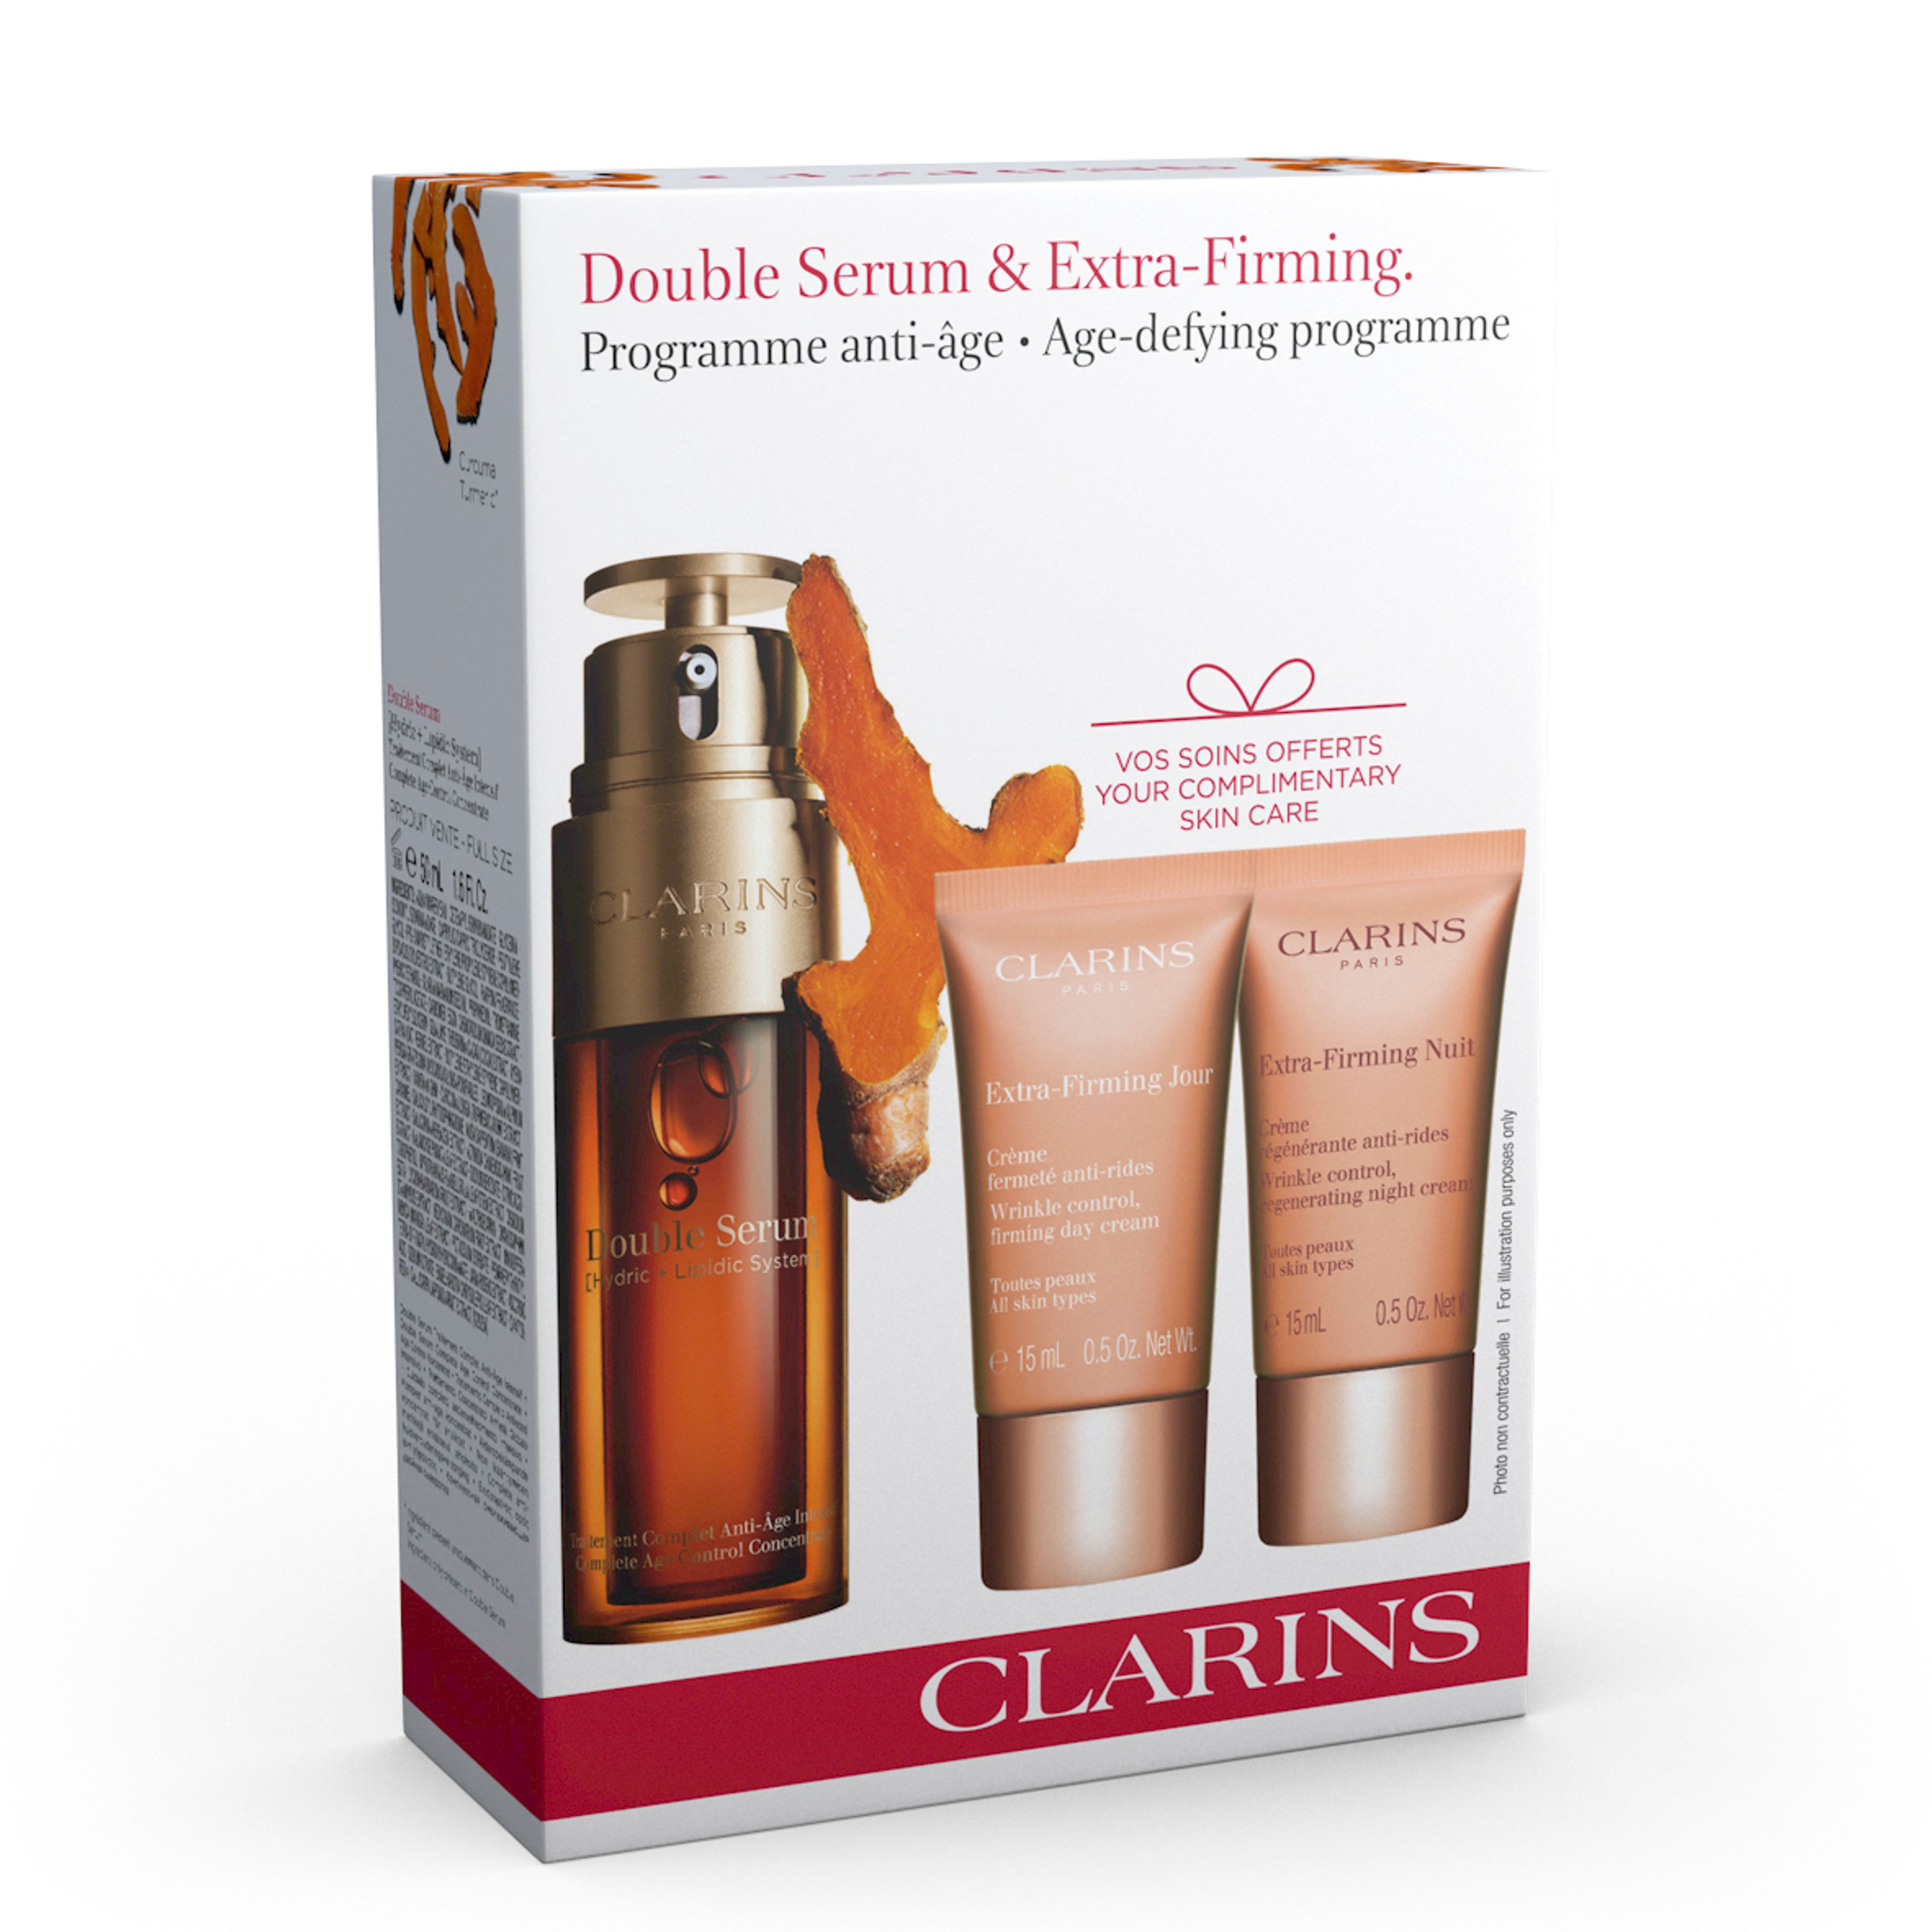 Clarins Clarins Kit Double Serum & Extra Firming - Double Serum & Extra-firming. Programma Antietà. 3